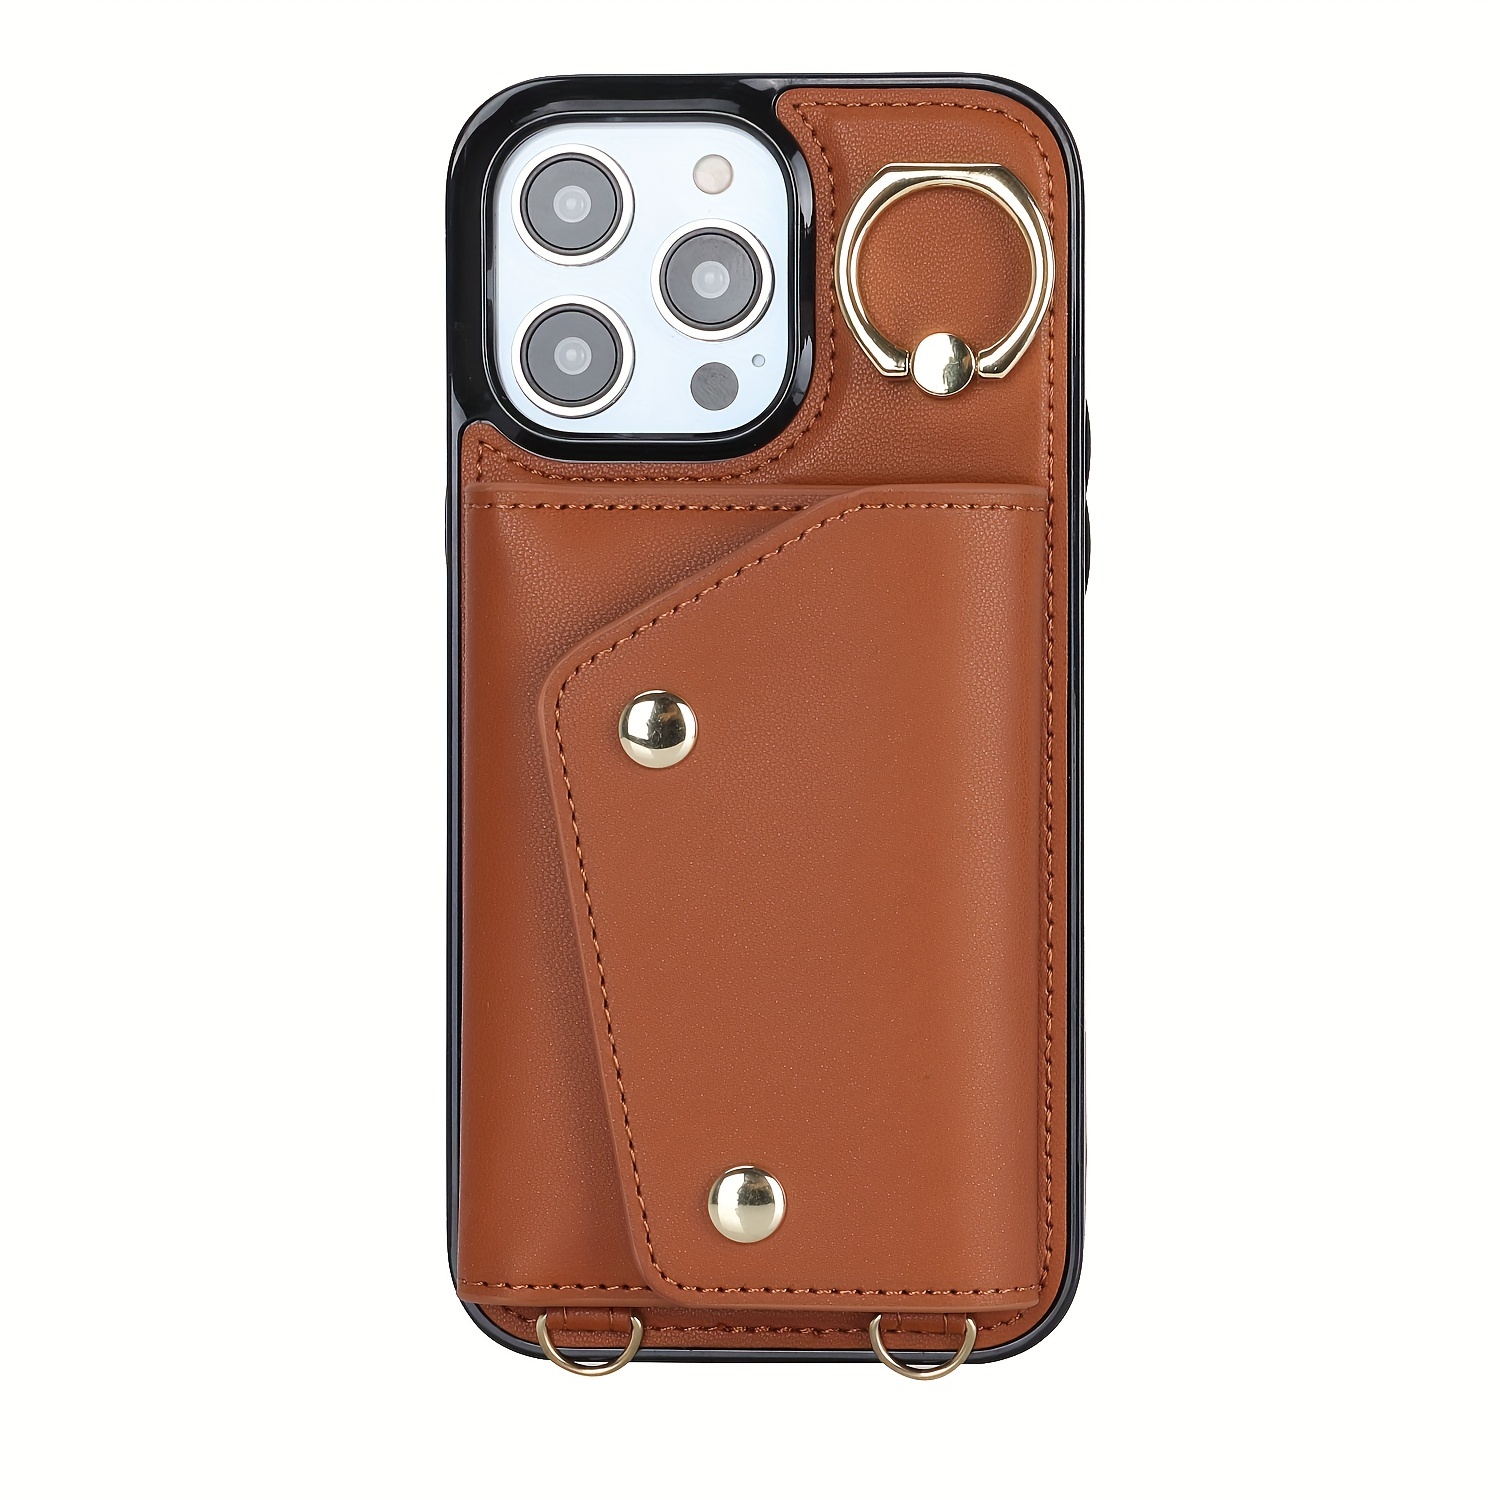 Fashion Square Leather Phone Case For Iphone 11 12 Pro Max Xs Max